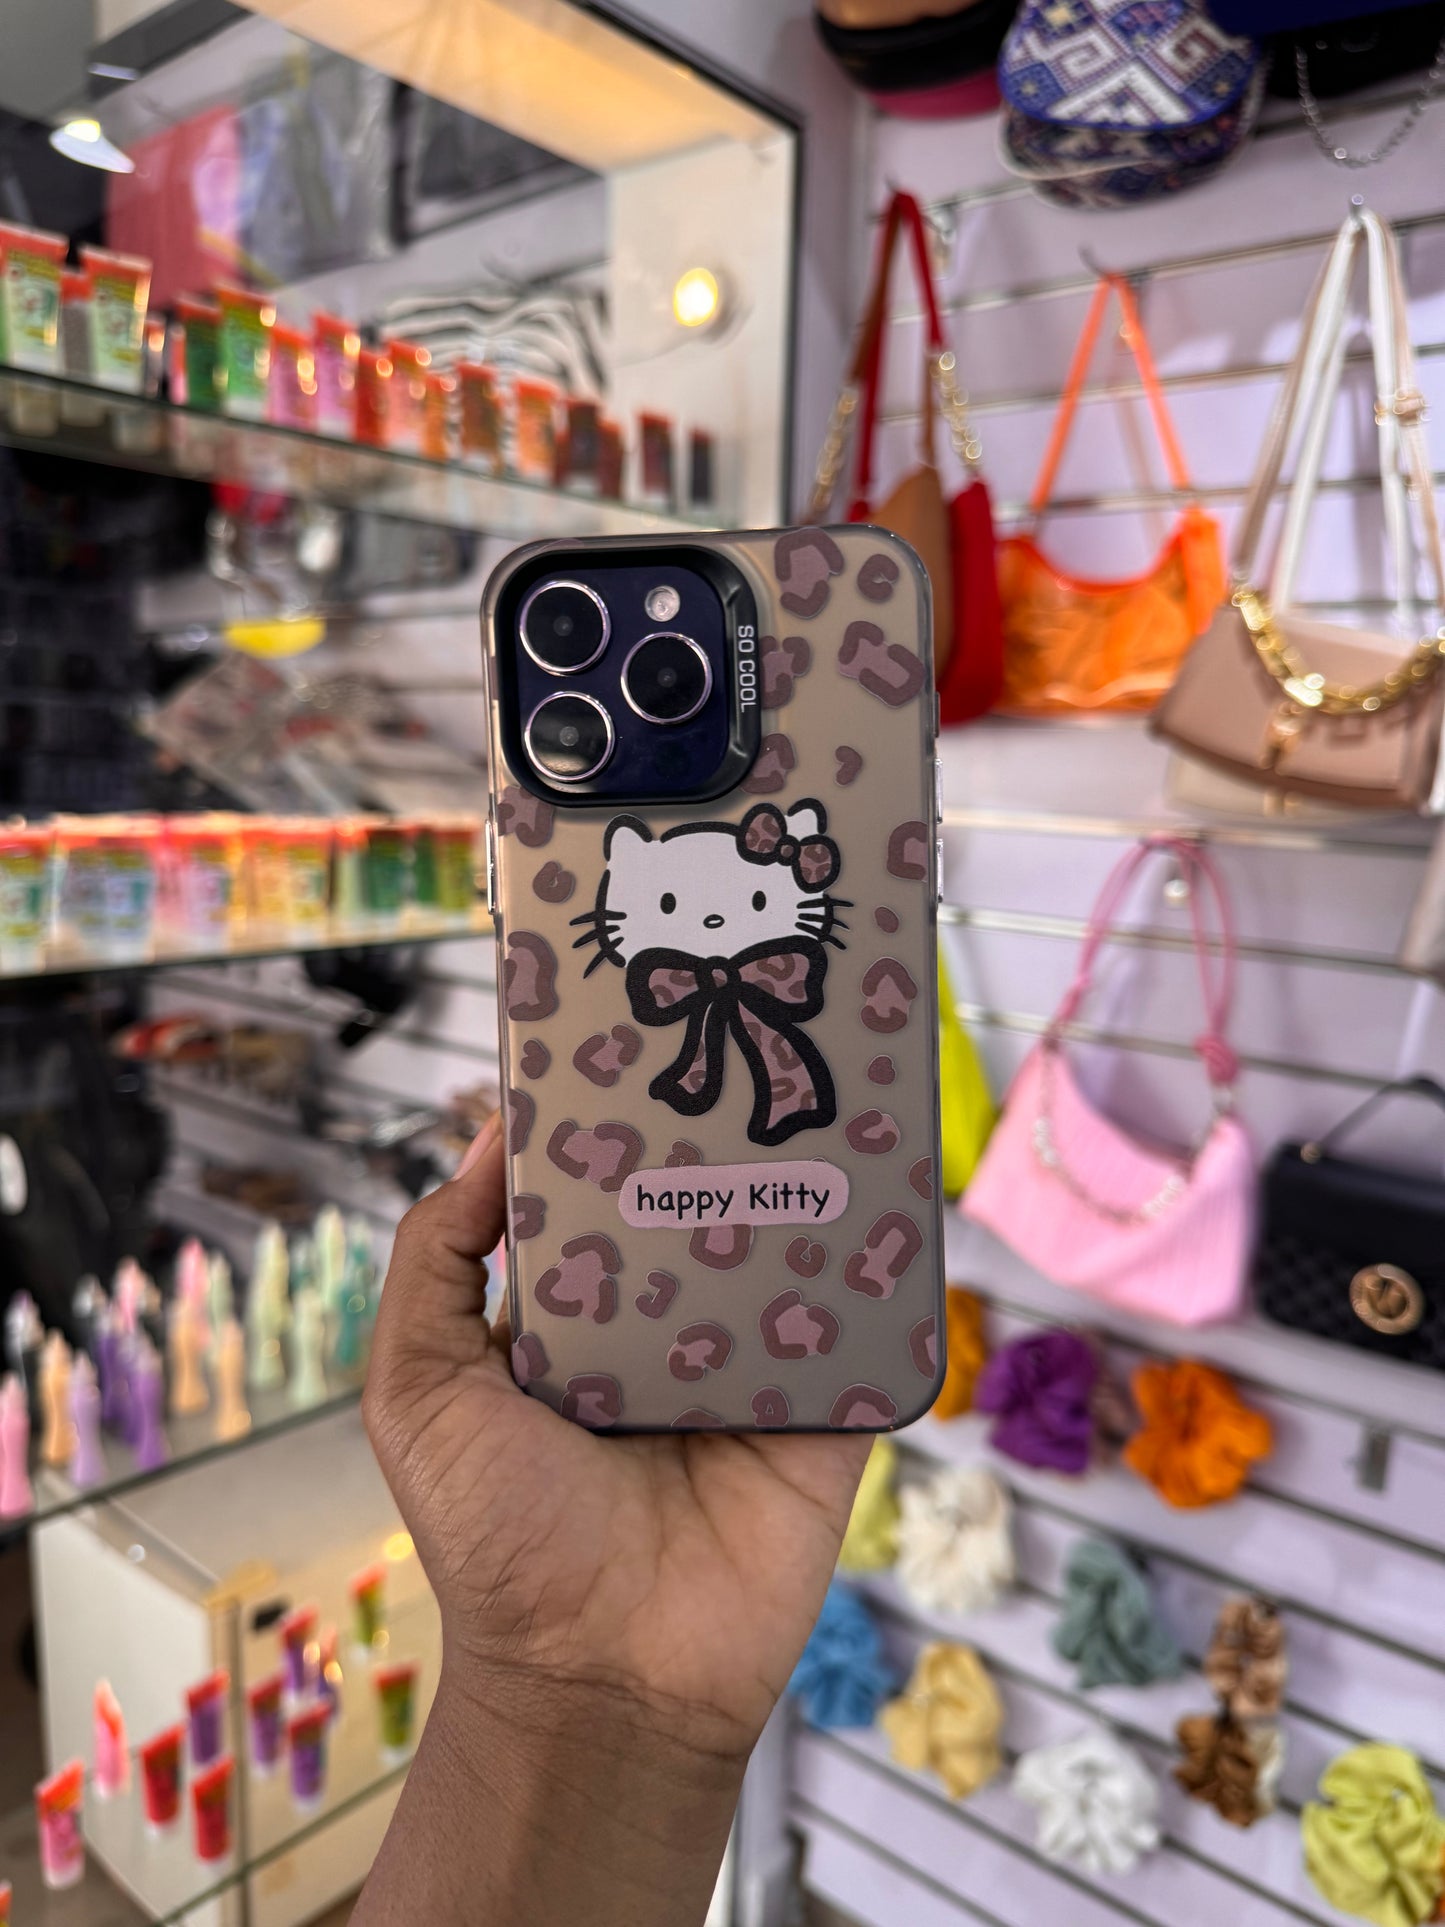 Brown Hello kitty Case for iPhones